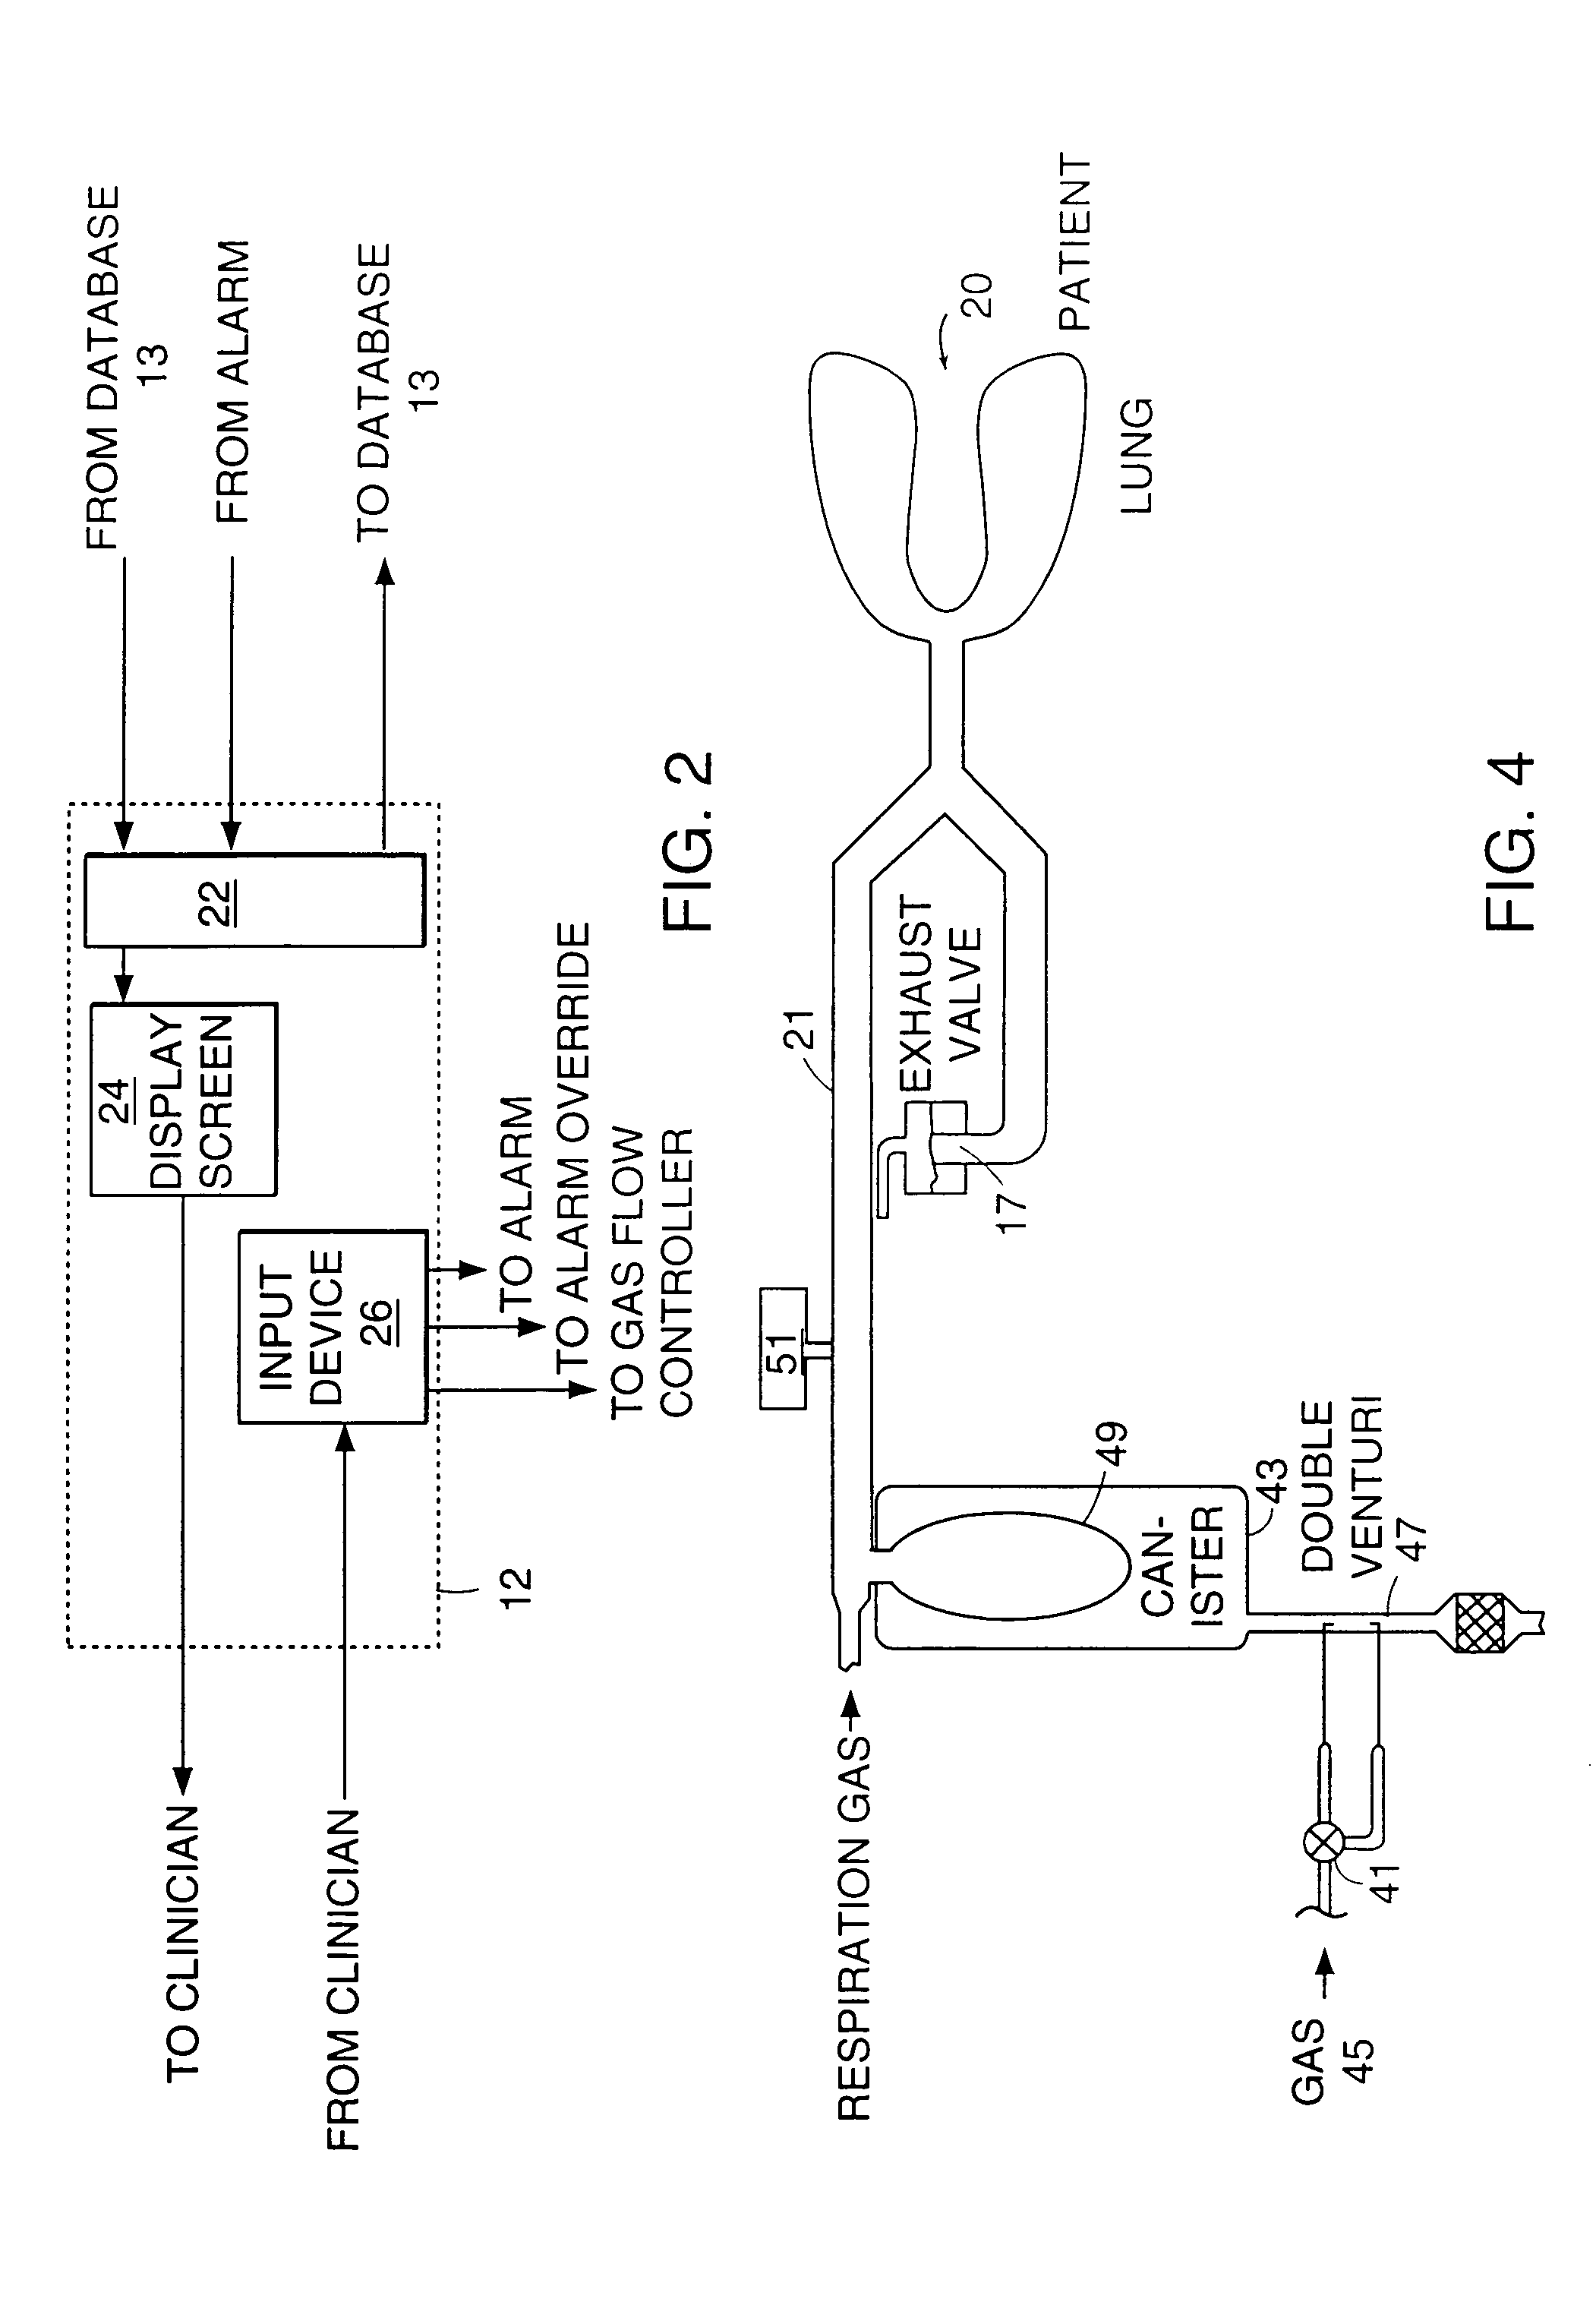 System for automatically weaning a patient from a ventilator, and method thereof